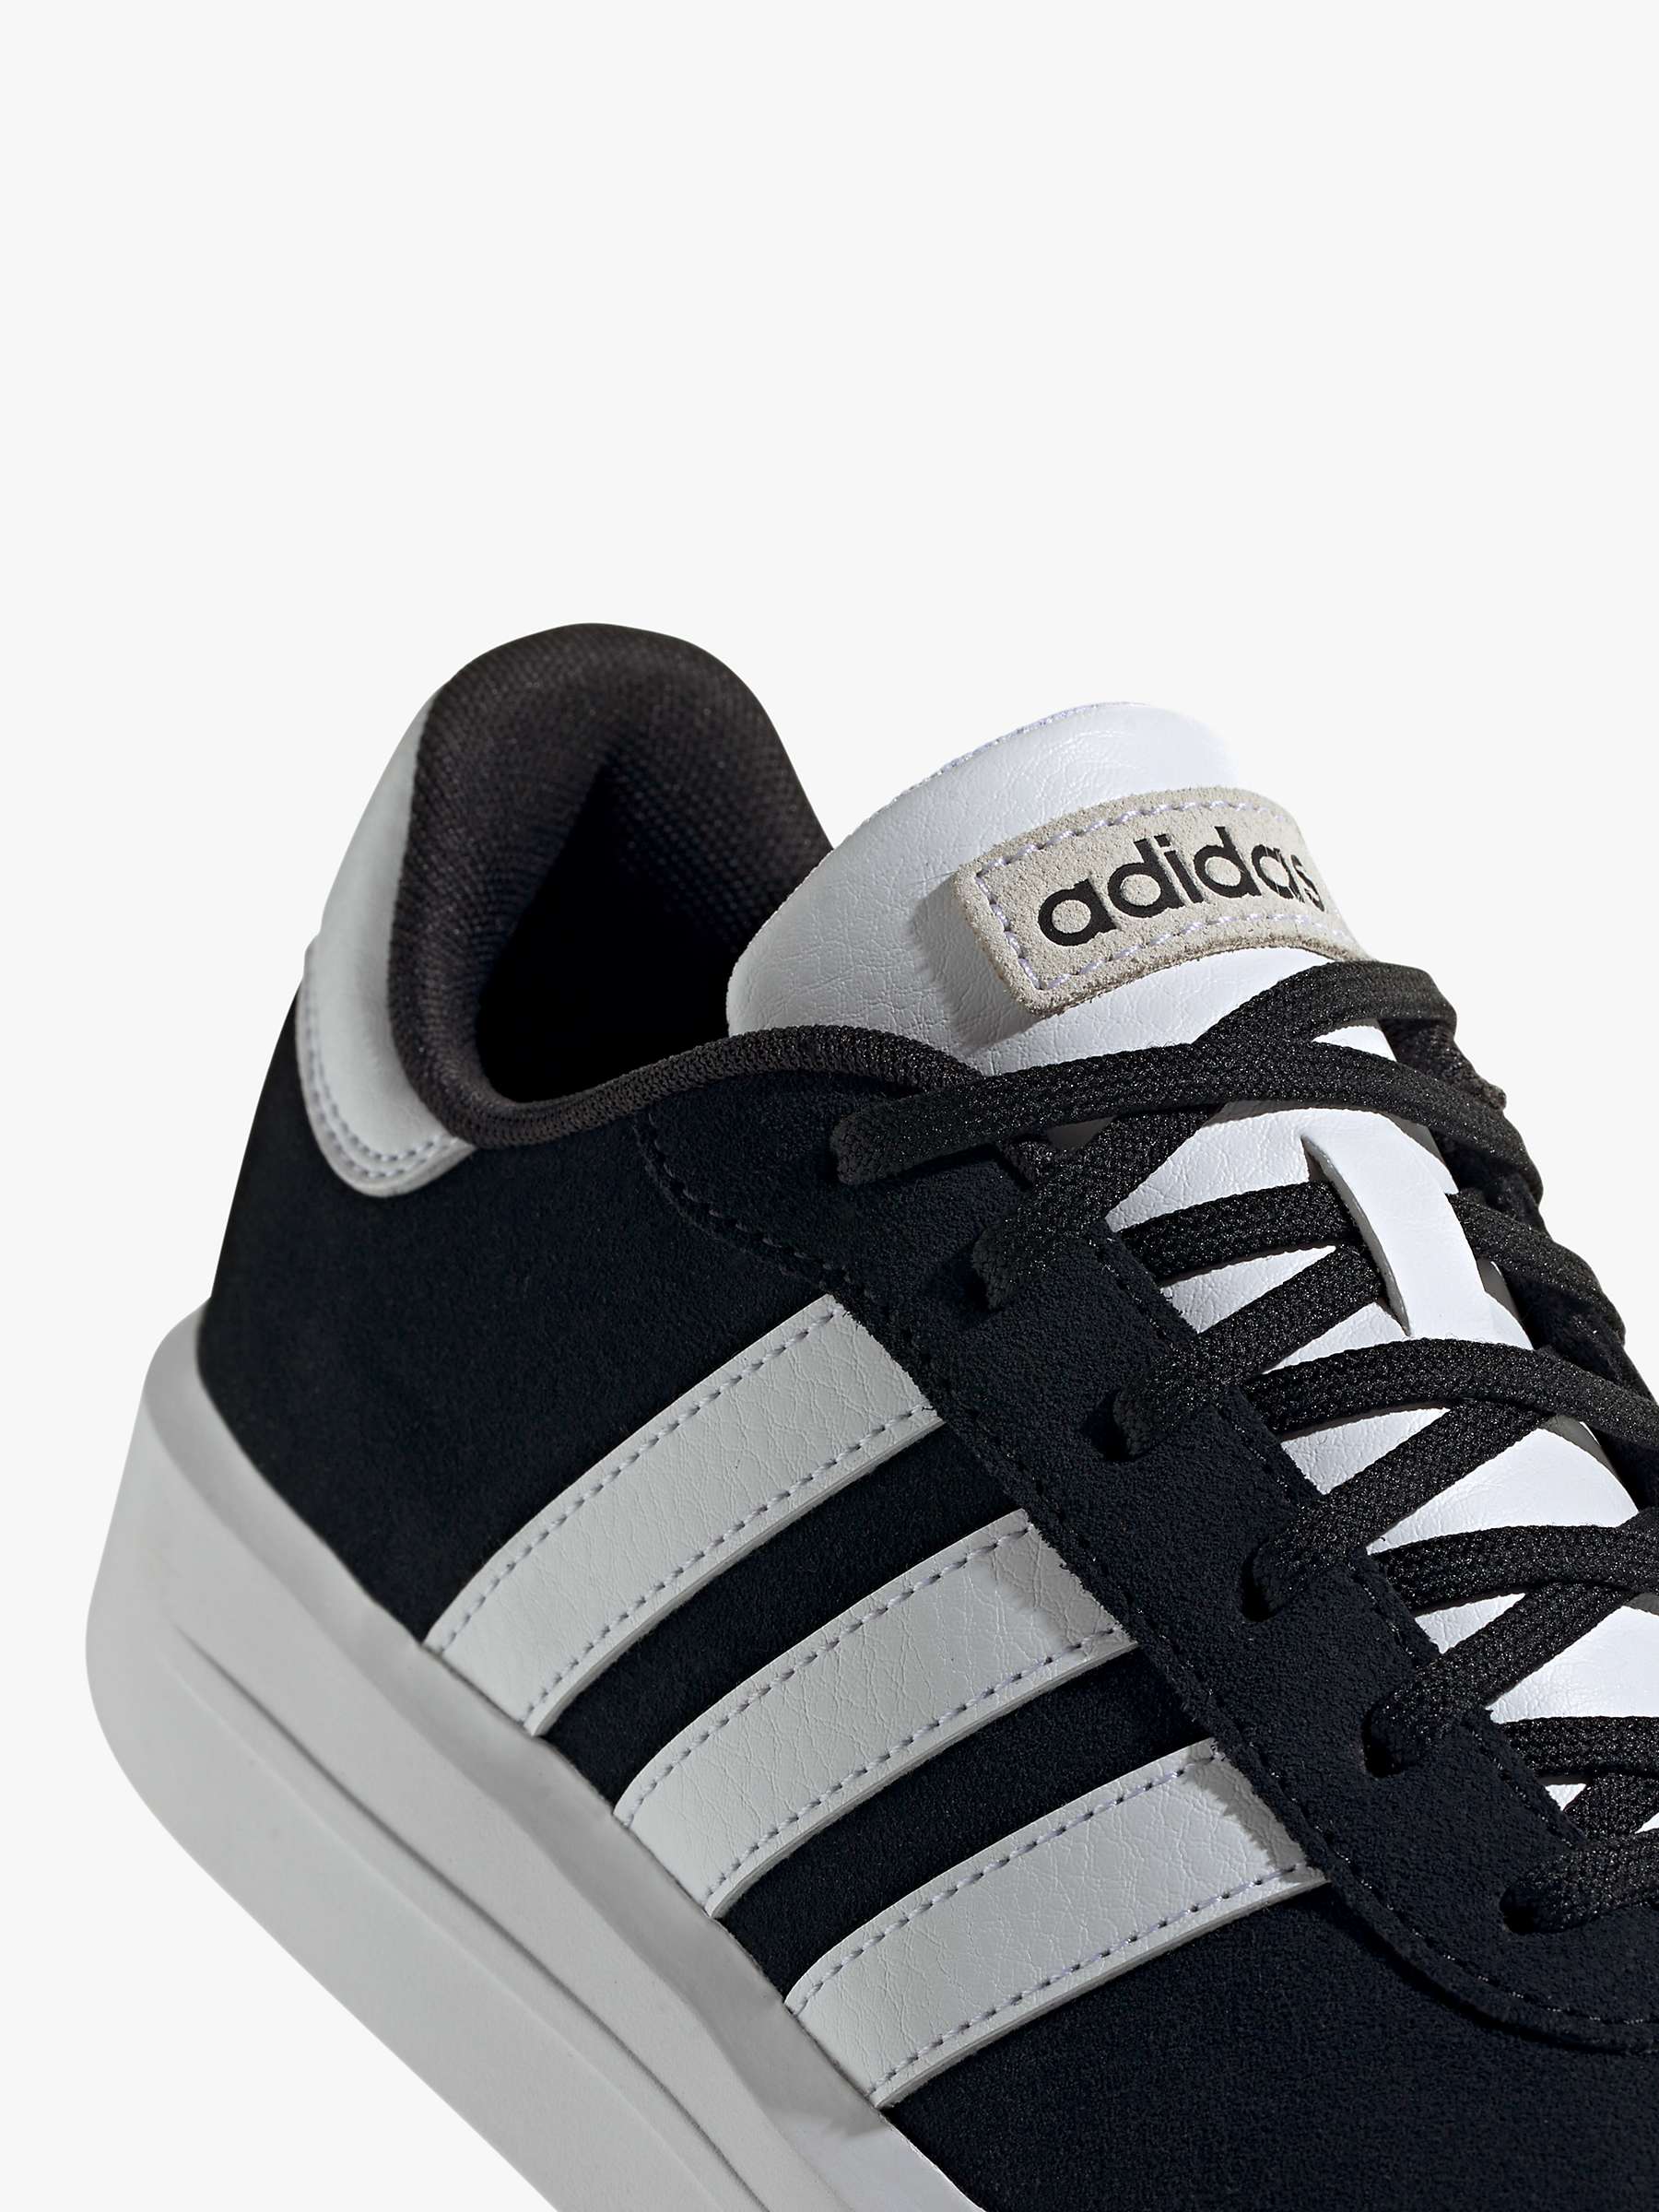 Buy adidas Court Platform Lace Up Trainers, Black/White Online at johnlewis.com